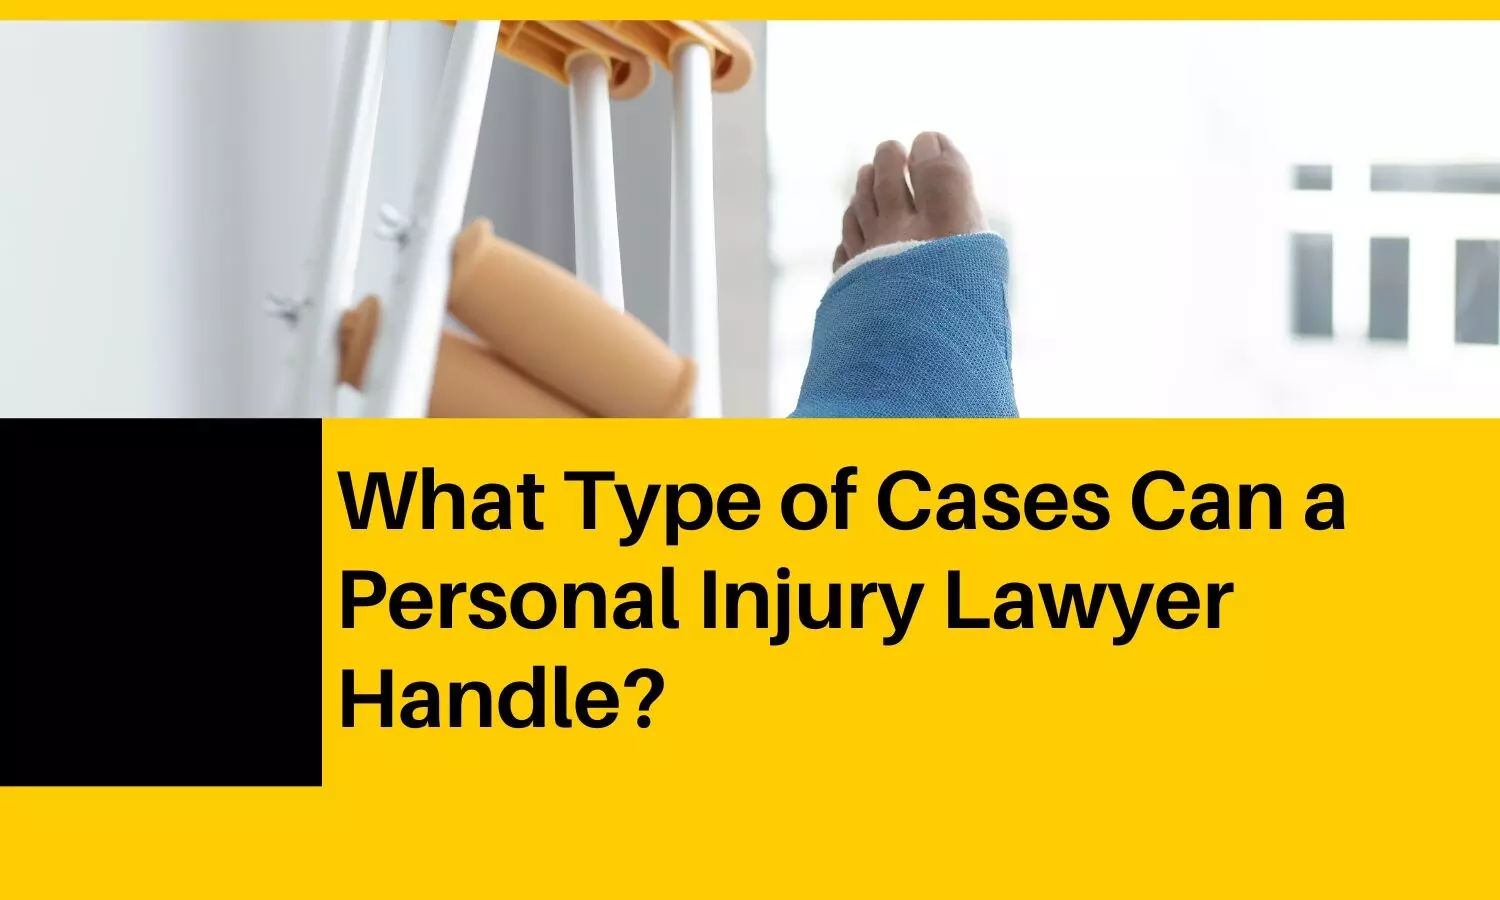 What Type of Cases Can a Personal Injury Lawyer handle?